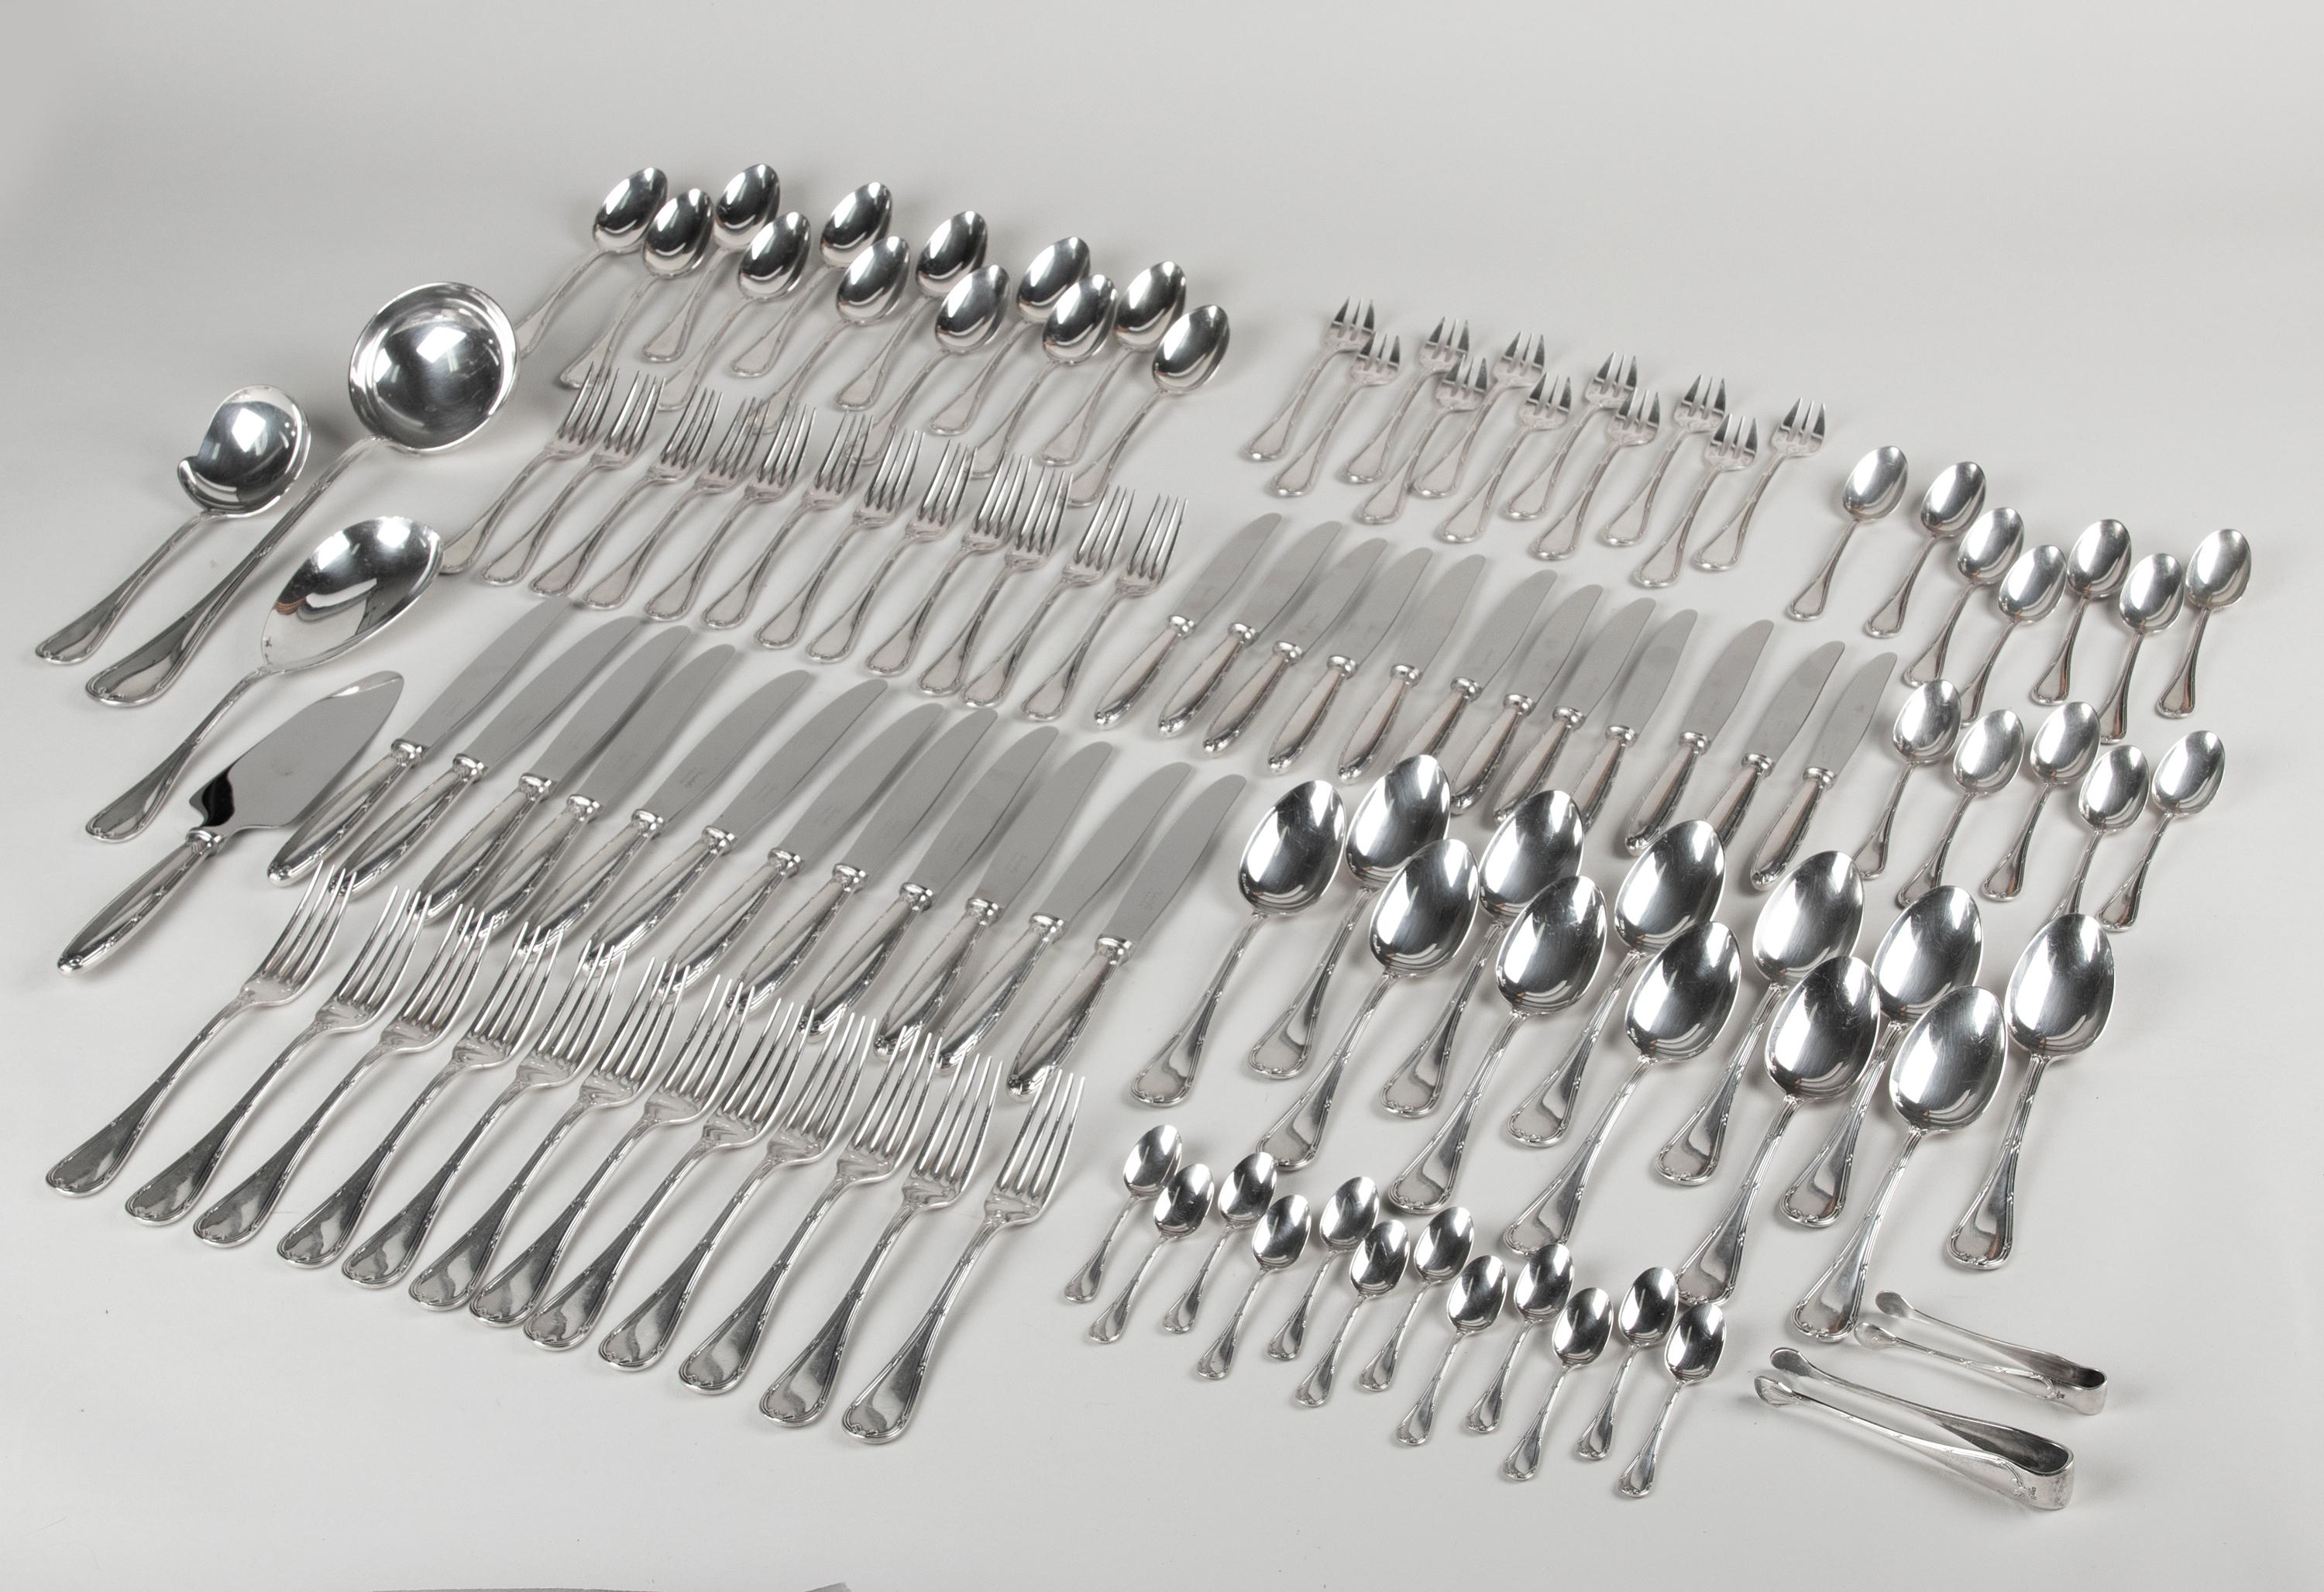 Beautiful silver plated cutlery set from the French brand Christofle. The cutlery is beautifully decorated with fine edges with bows. The name of this model is Rubans. This set is loose, no canteen is included. The cutlery is used, but looks very